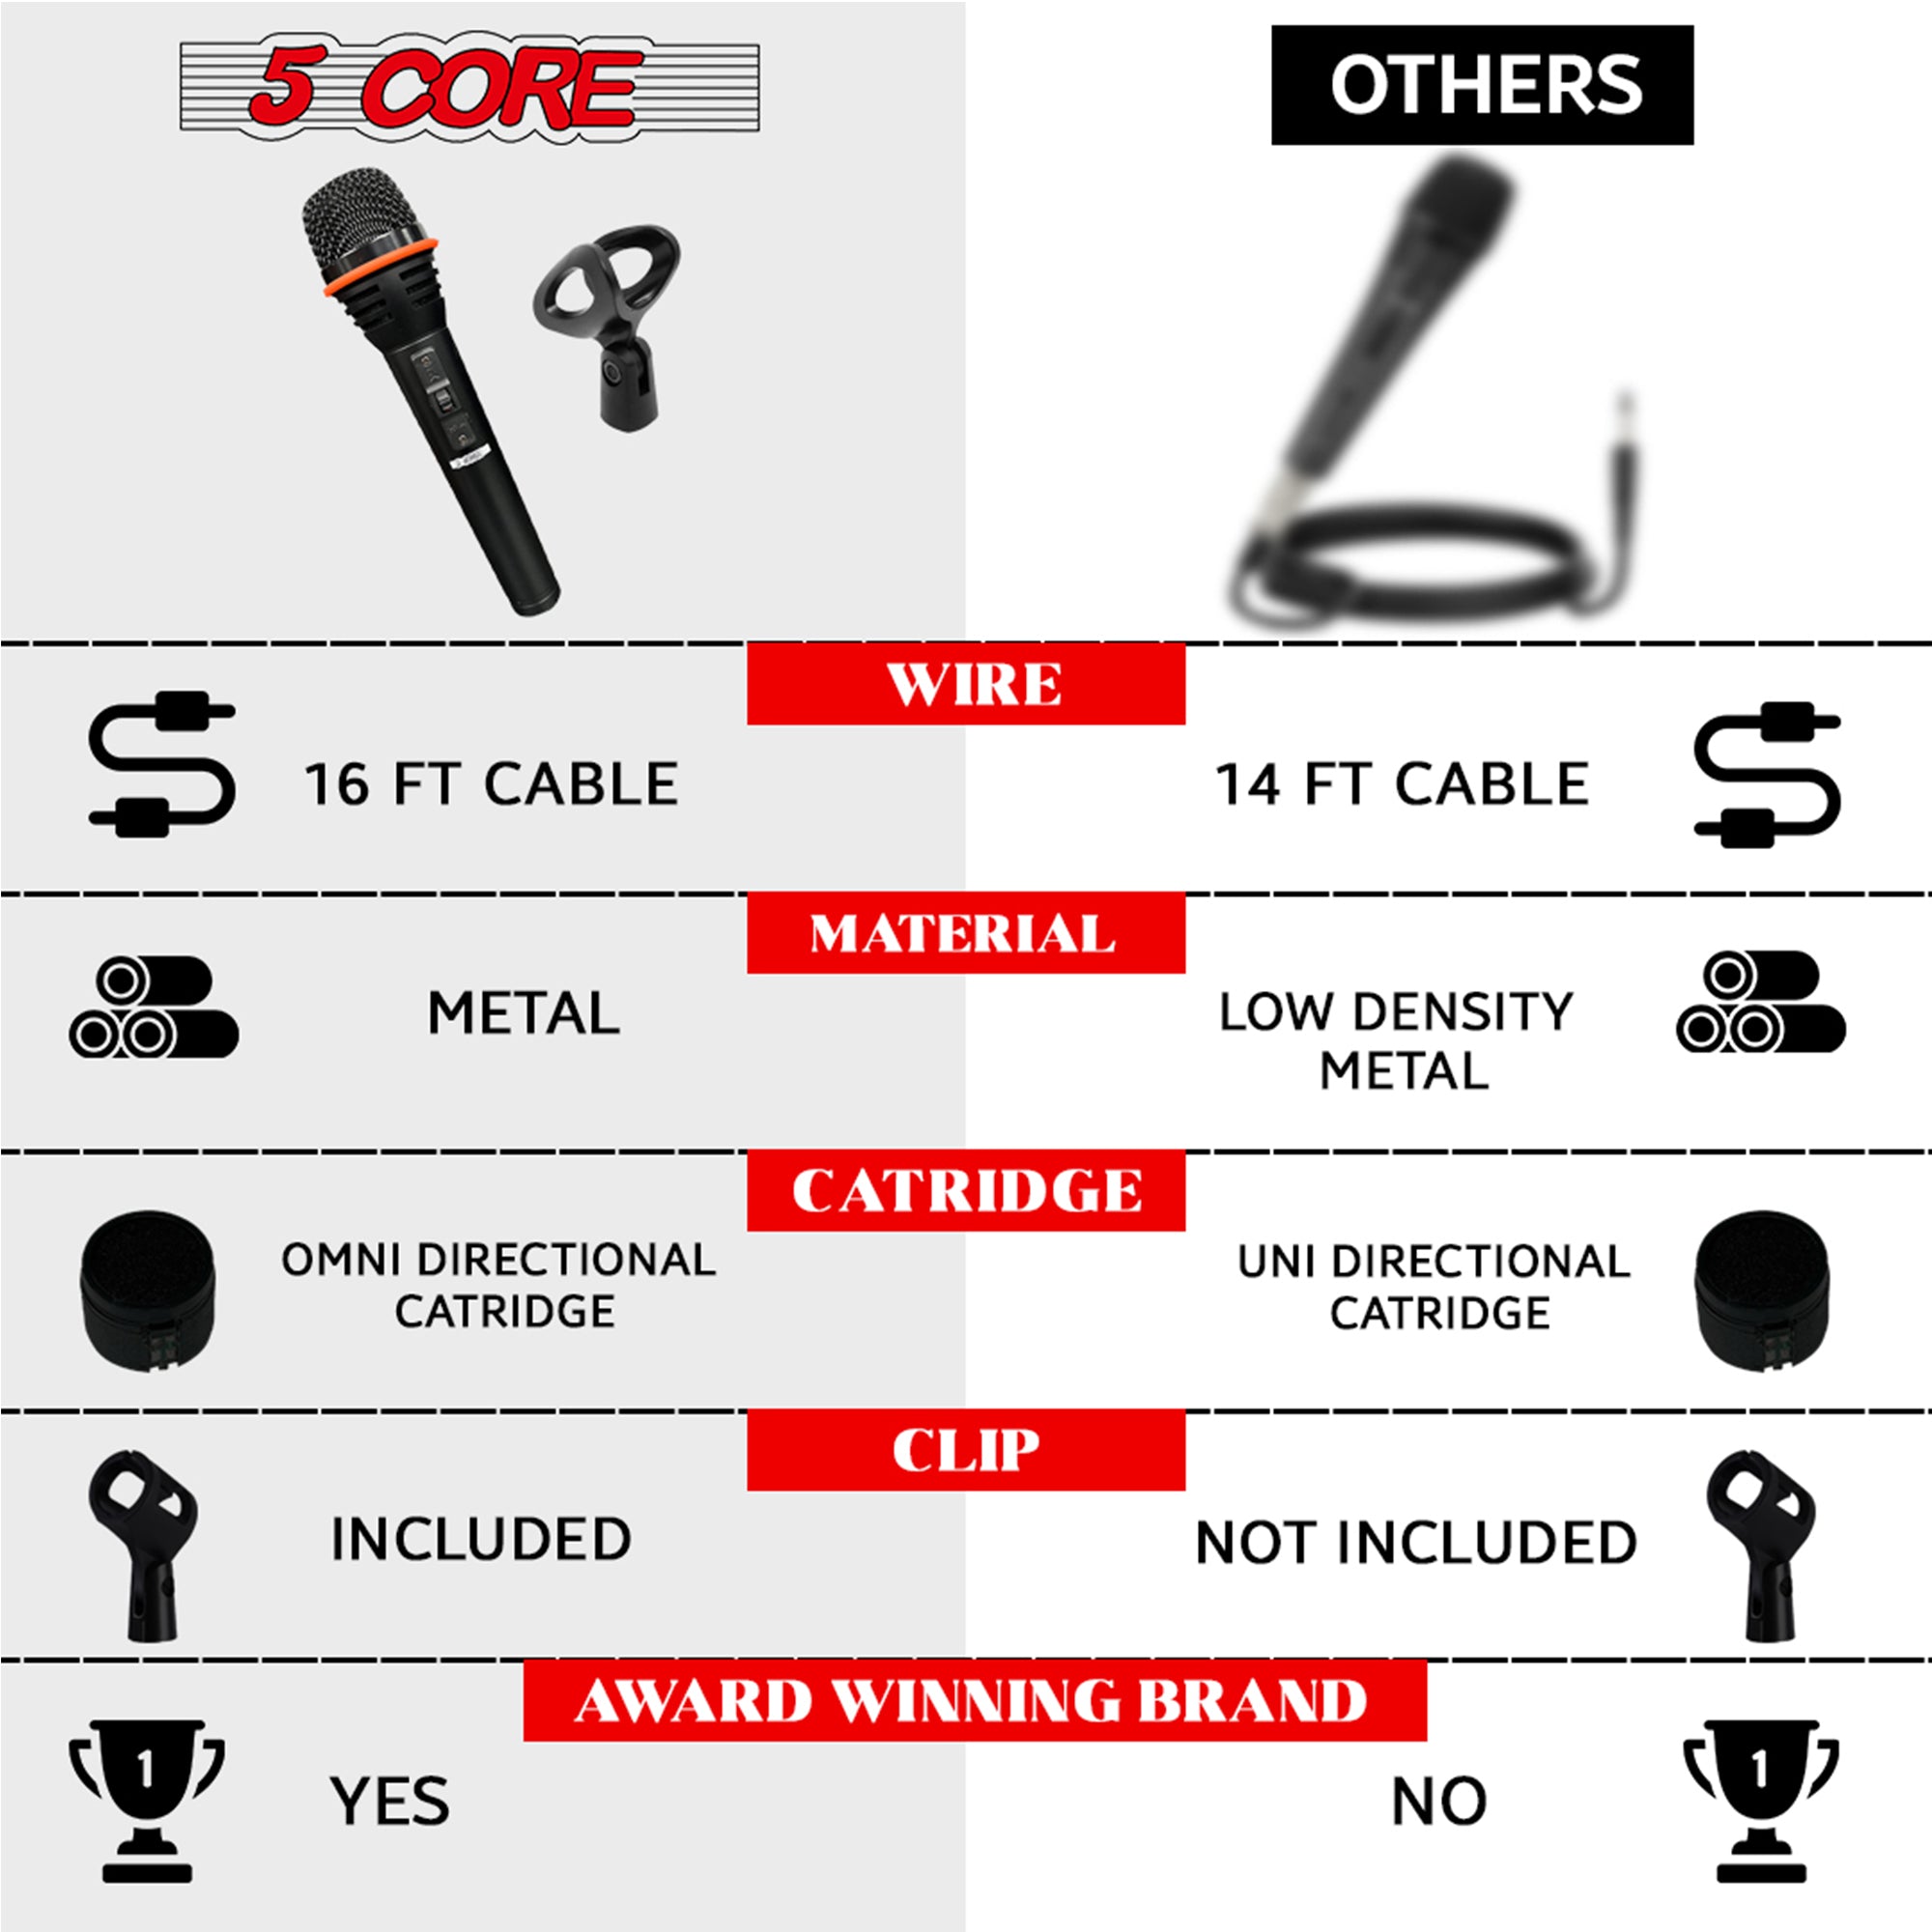 Dynamic Mic for Pro Performances: 5 Core Microphone